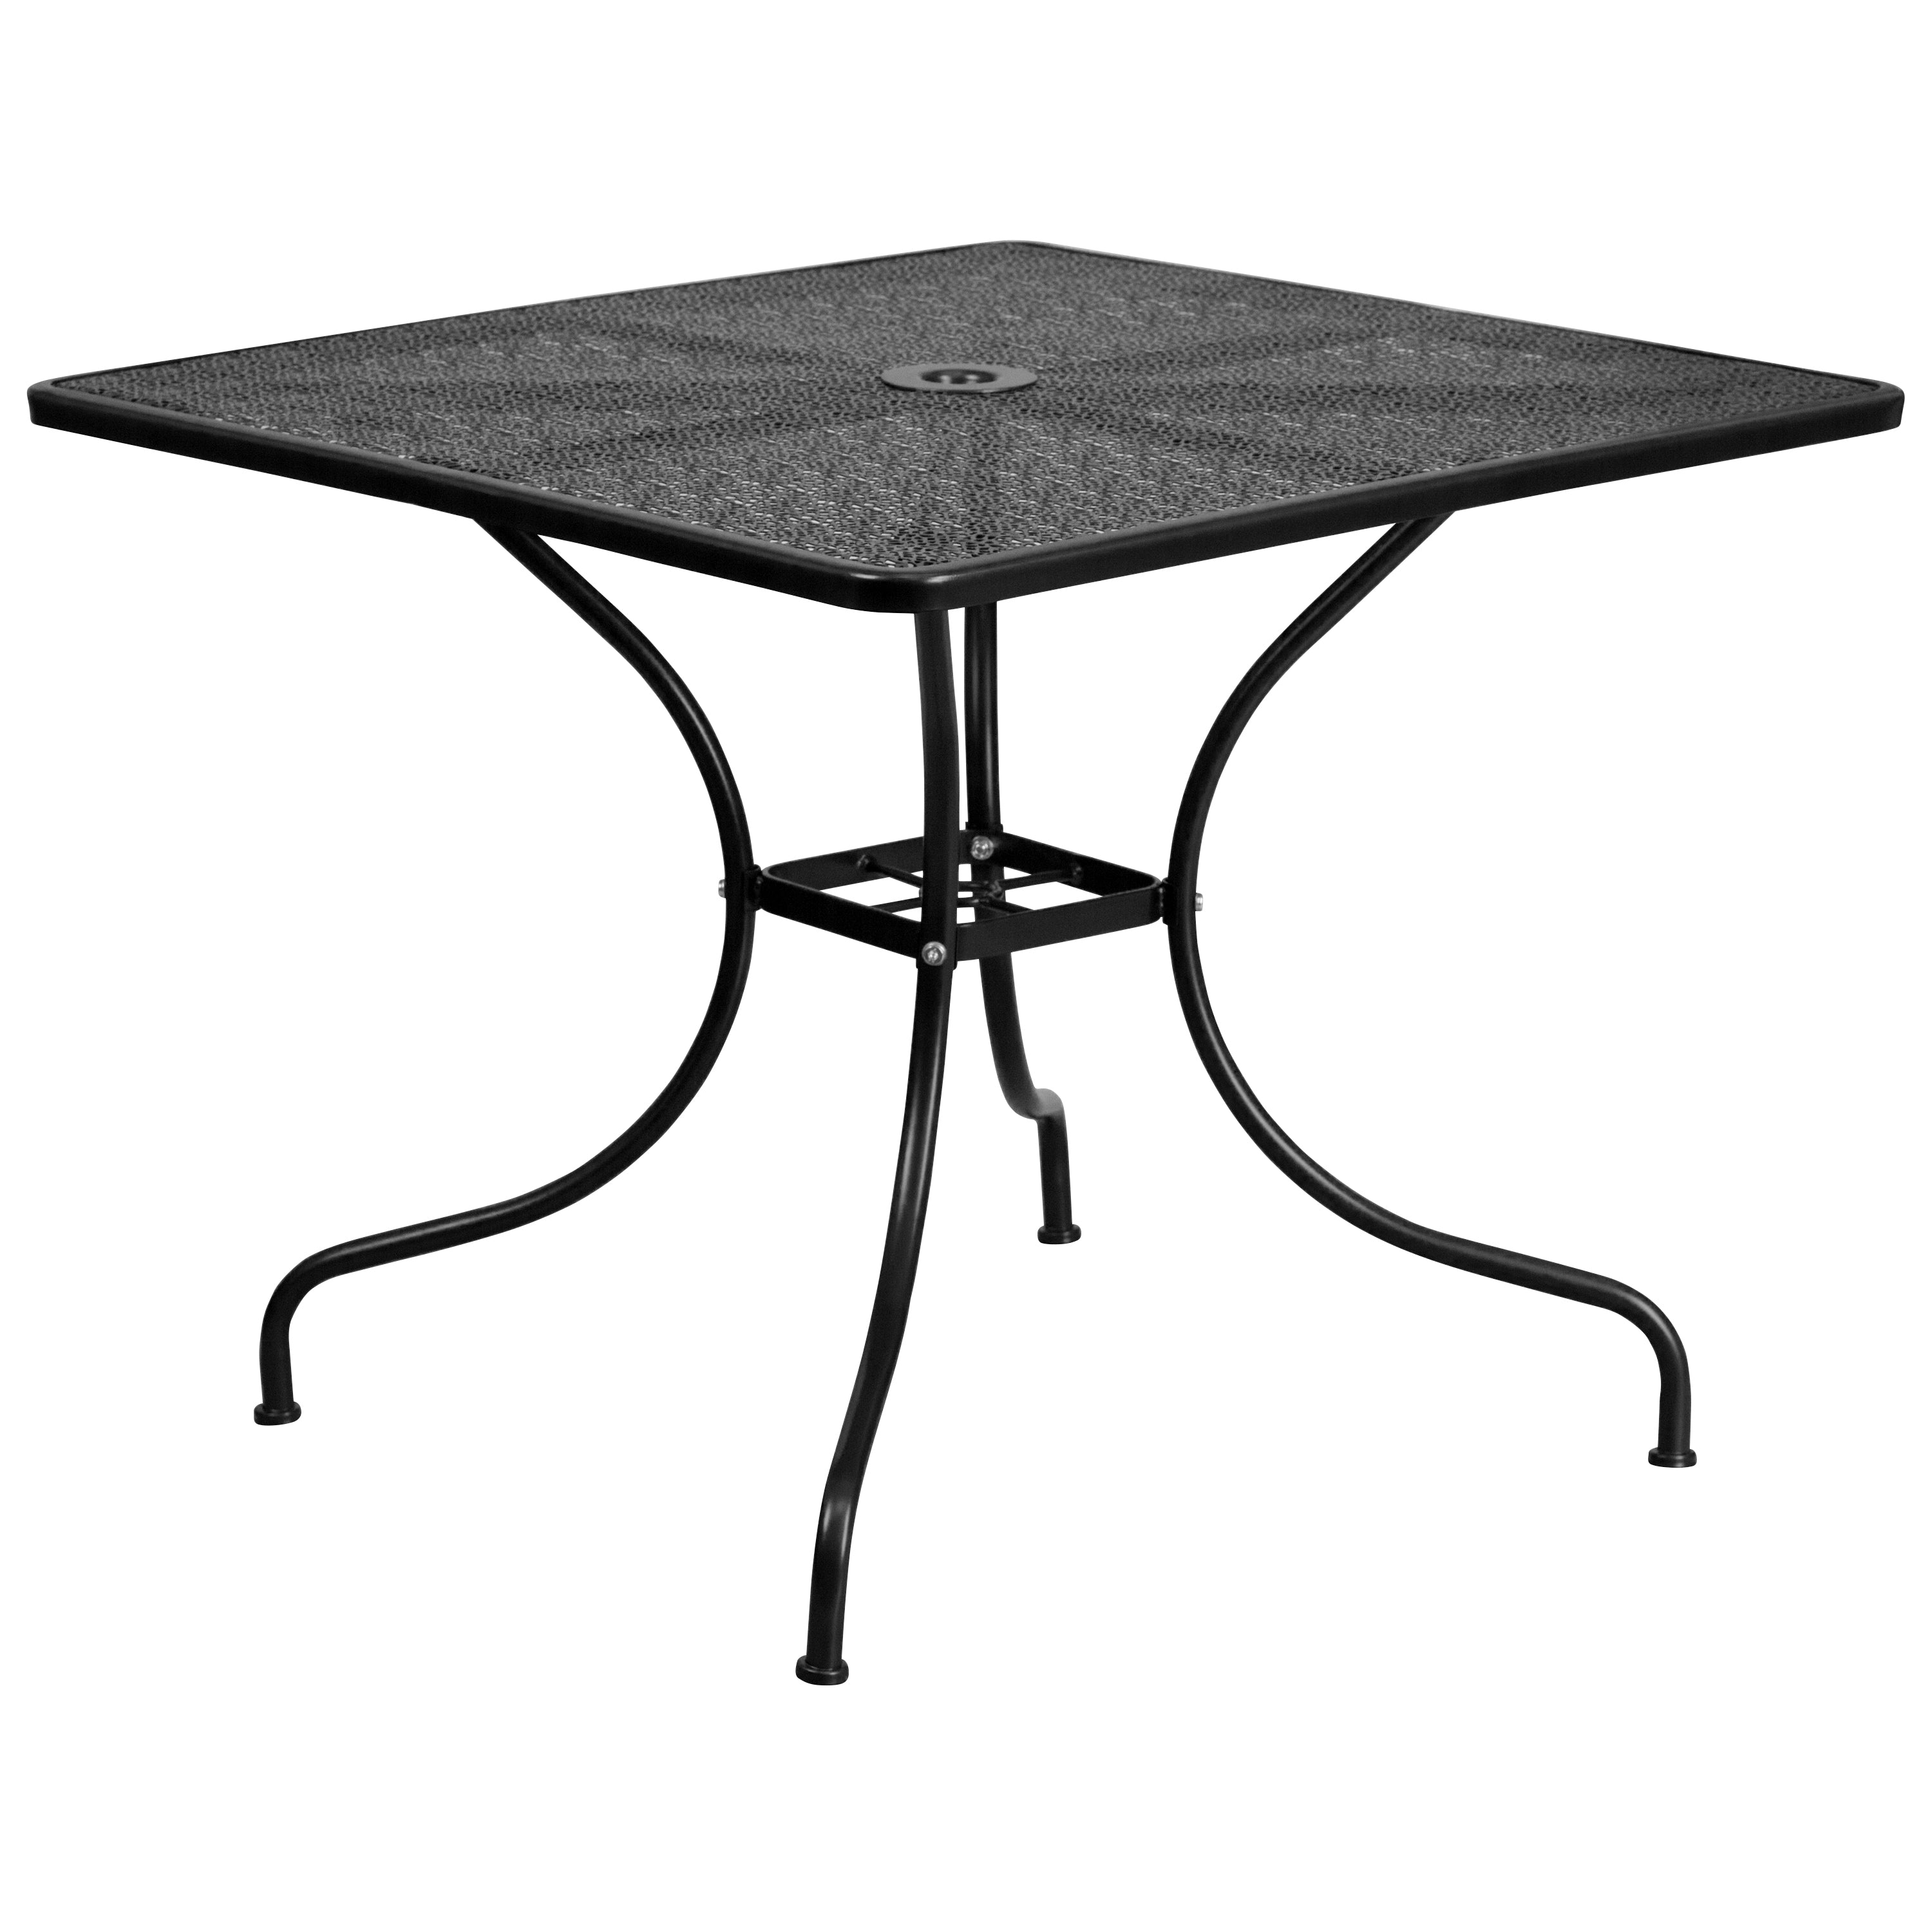 Oia Commercial Grade 35.5" Square Indoor-Outdoor Steel Patio Table Set with 2 Round Back Chairs-Indoor/Outdoor Dining Sets-Flash Furniture-Wall2Wall Furnishings